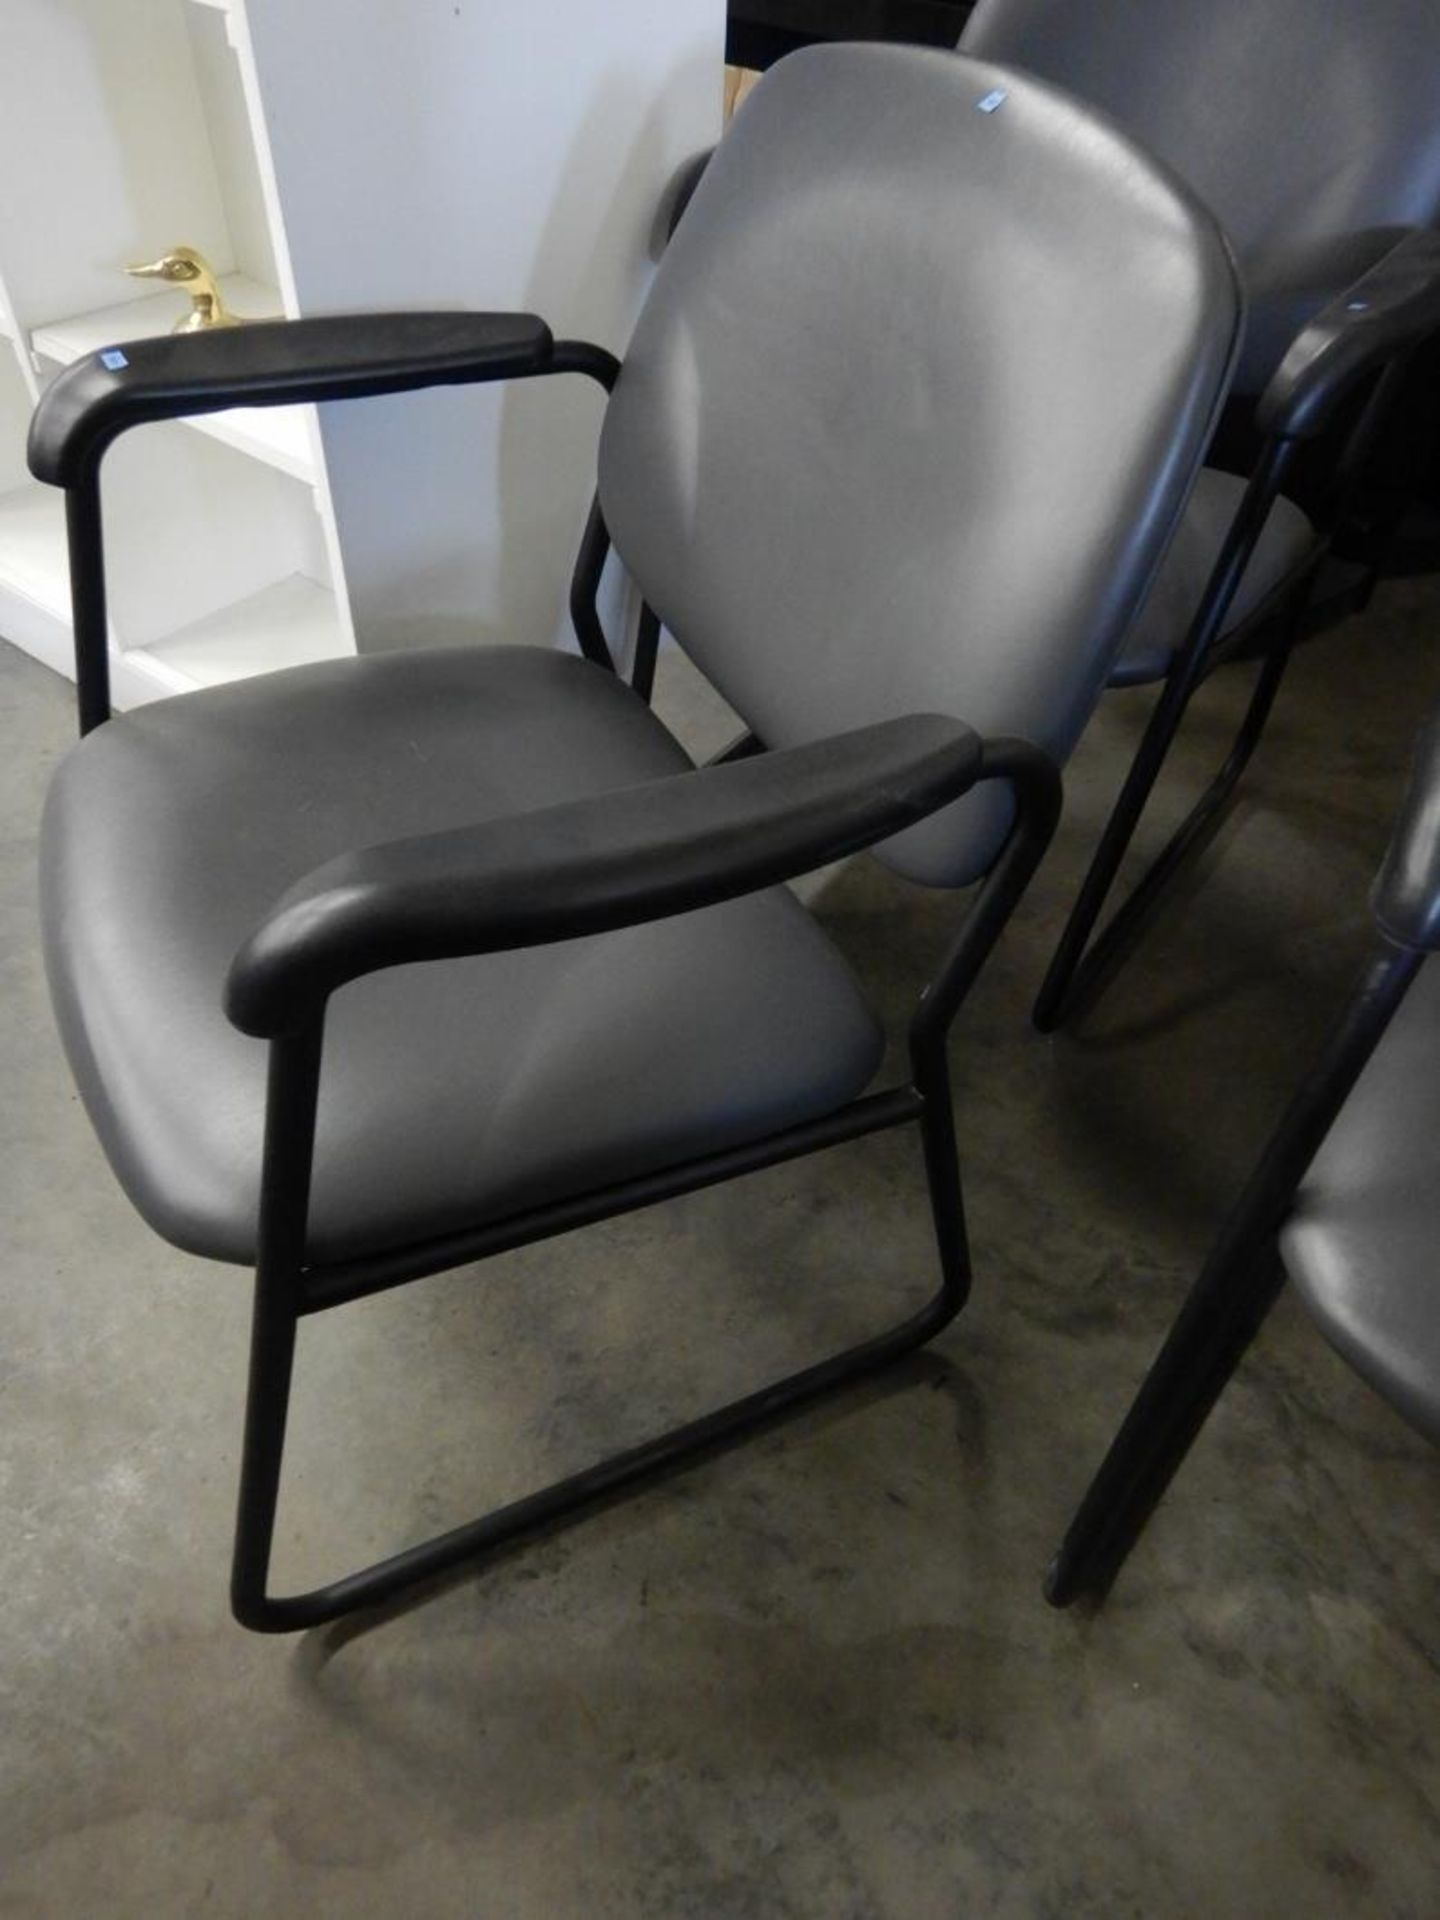 SKIDDED OFFICE SIDE CHAIR - DARK GREY PADDED WITH BLACK ARMS (PAIR) - Image 2 of 2